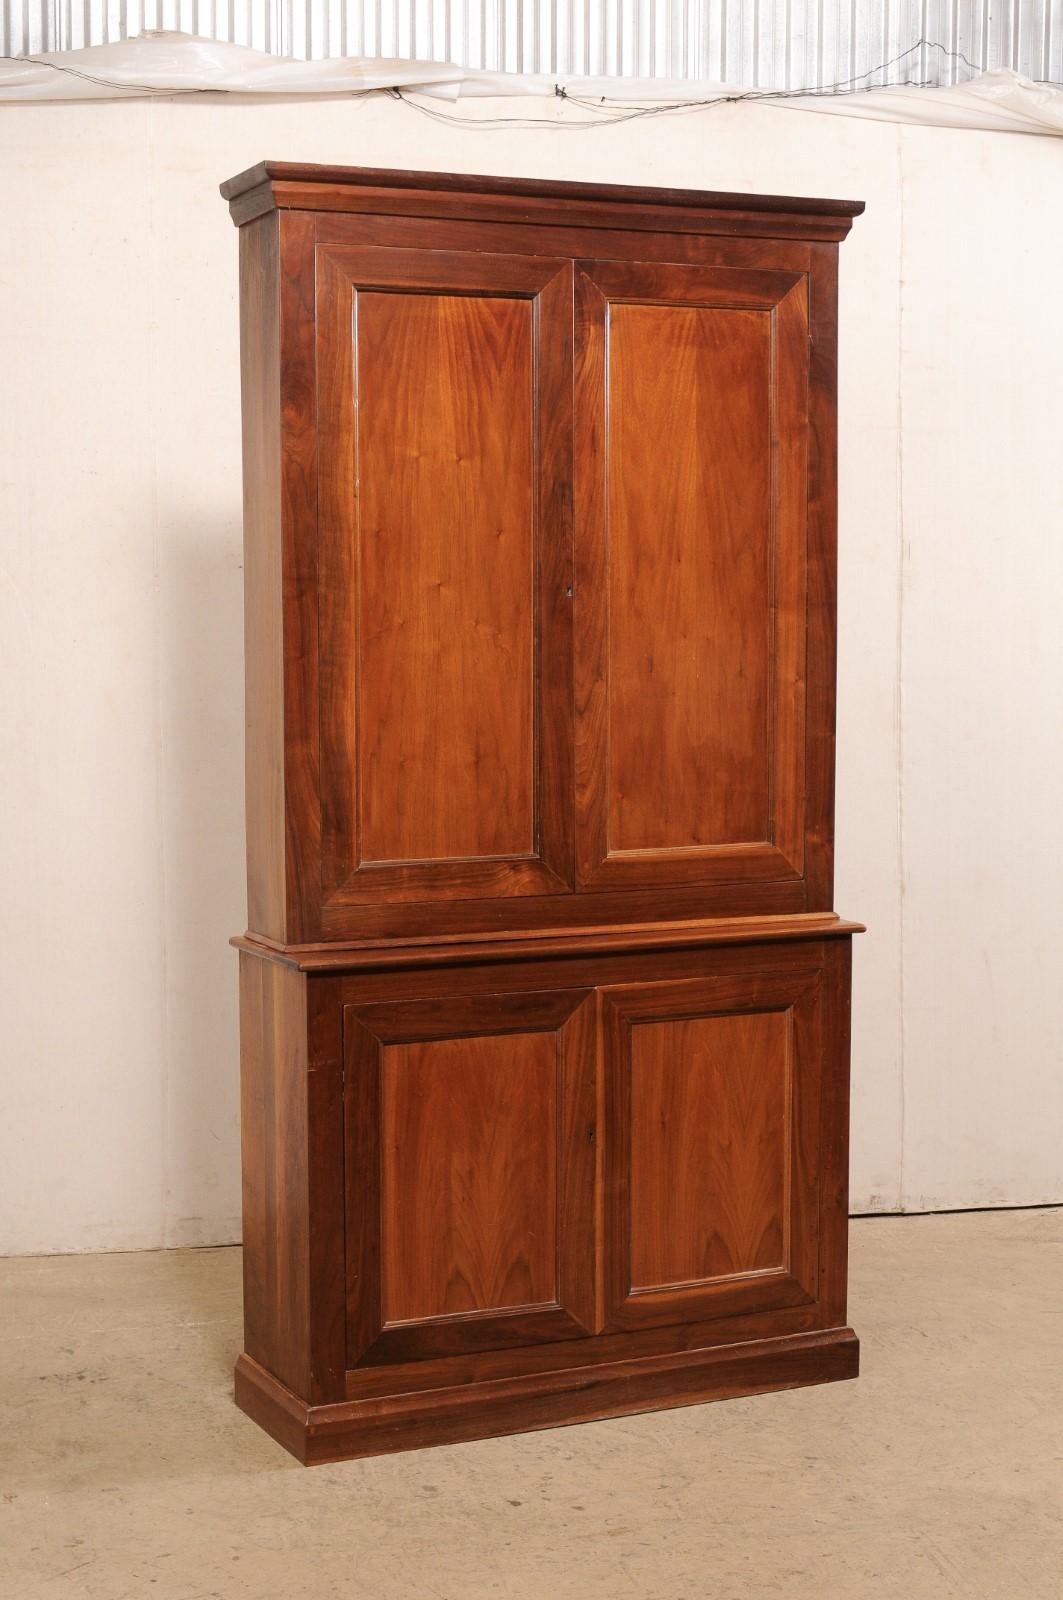 French Cherry Wood 7.5+ Ft. Tall Enclosed Cabinet with Slender Depth, Mid 20th c For Sale 1